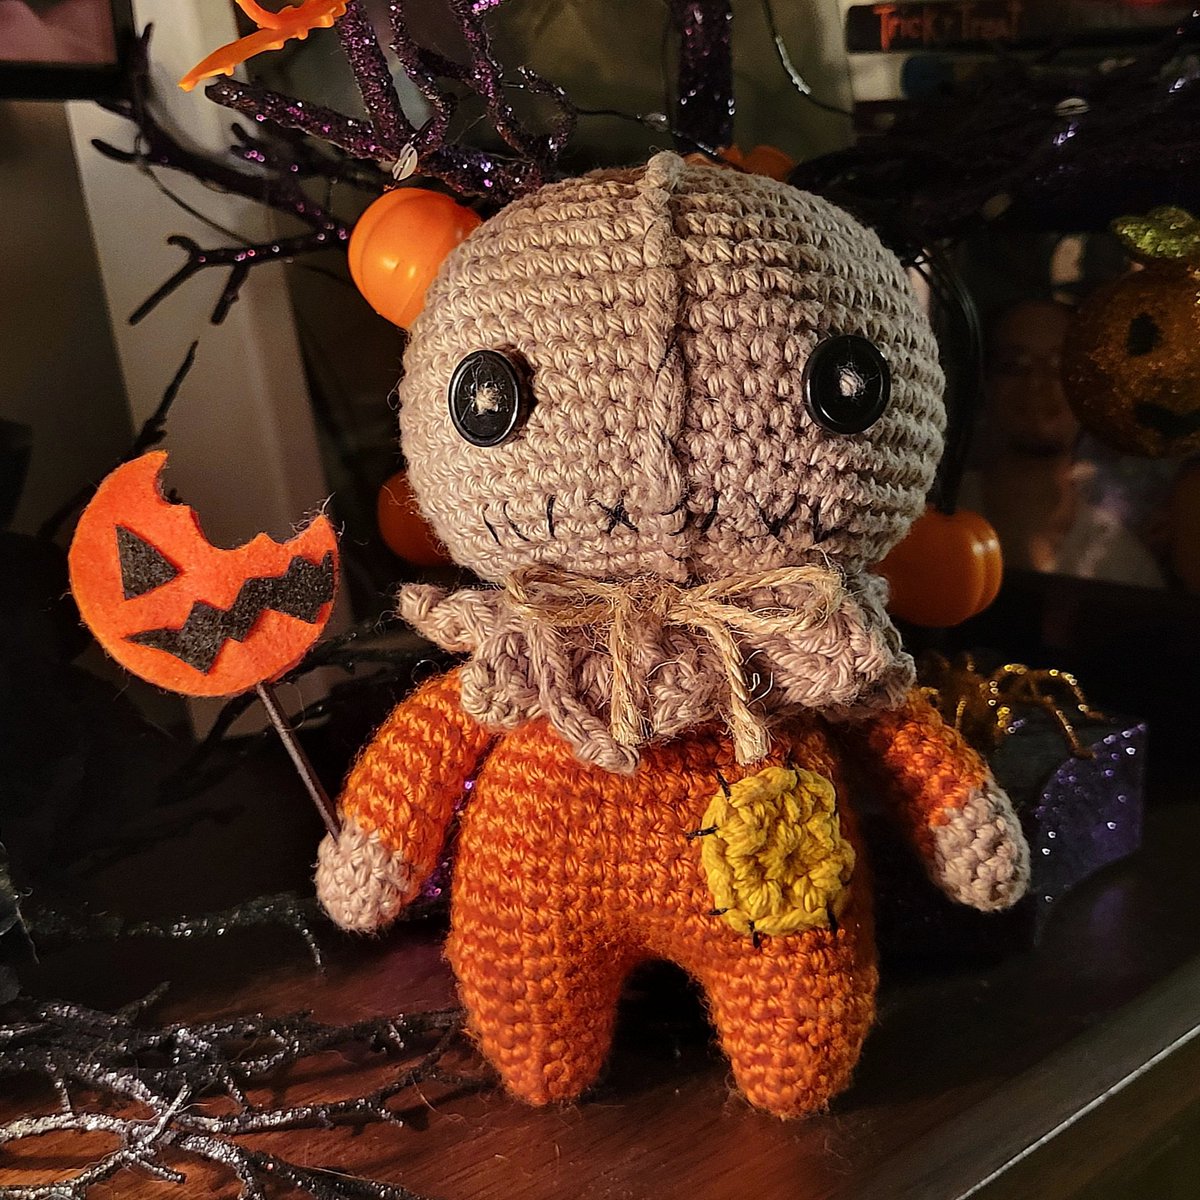 A couple days late, but I finally finished Sam! This was so much fun to make 🖤🎃

#samhain #trickrtreat #amigurumi